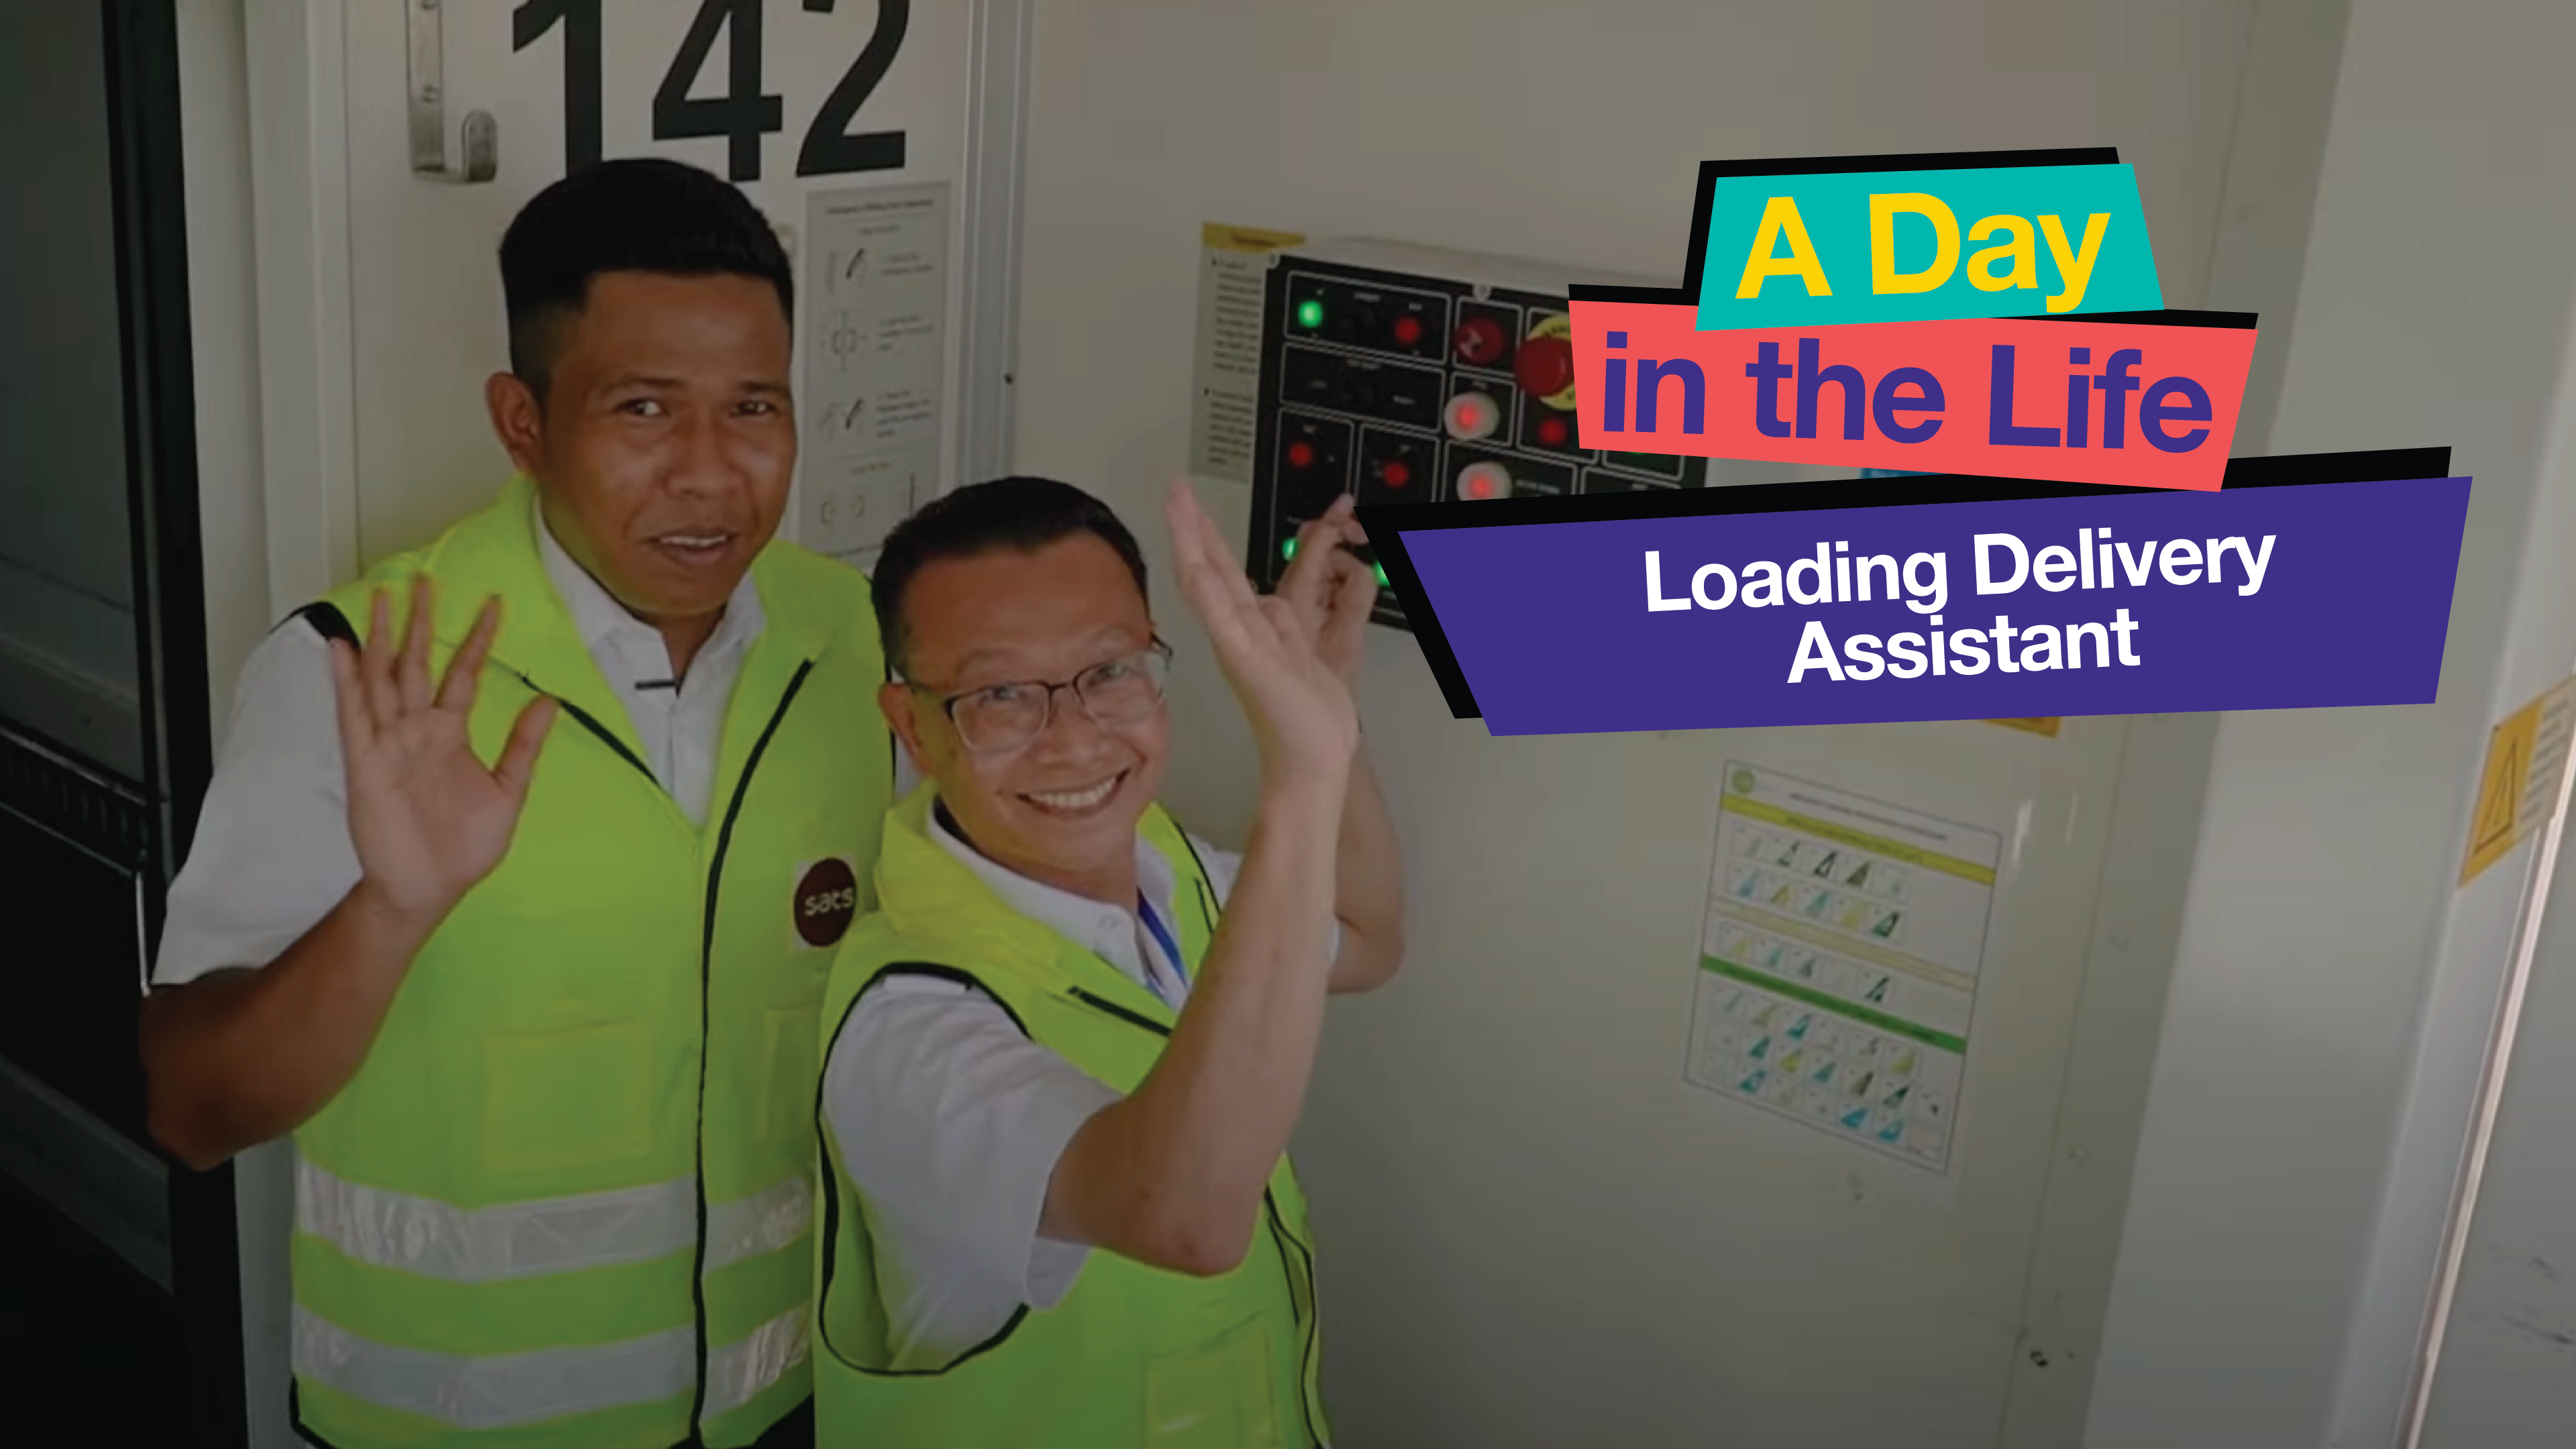 Loading Delivery Assistant